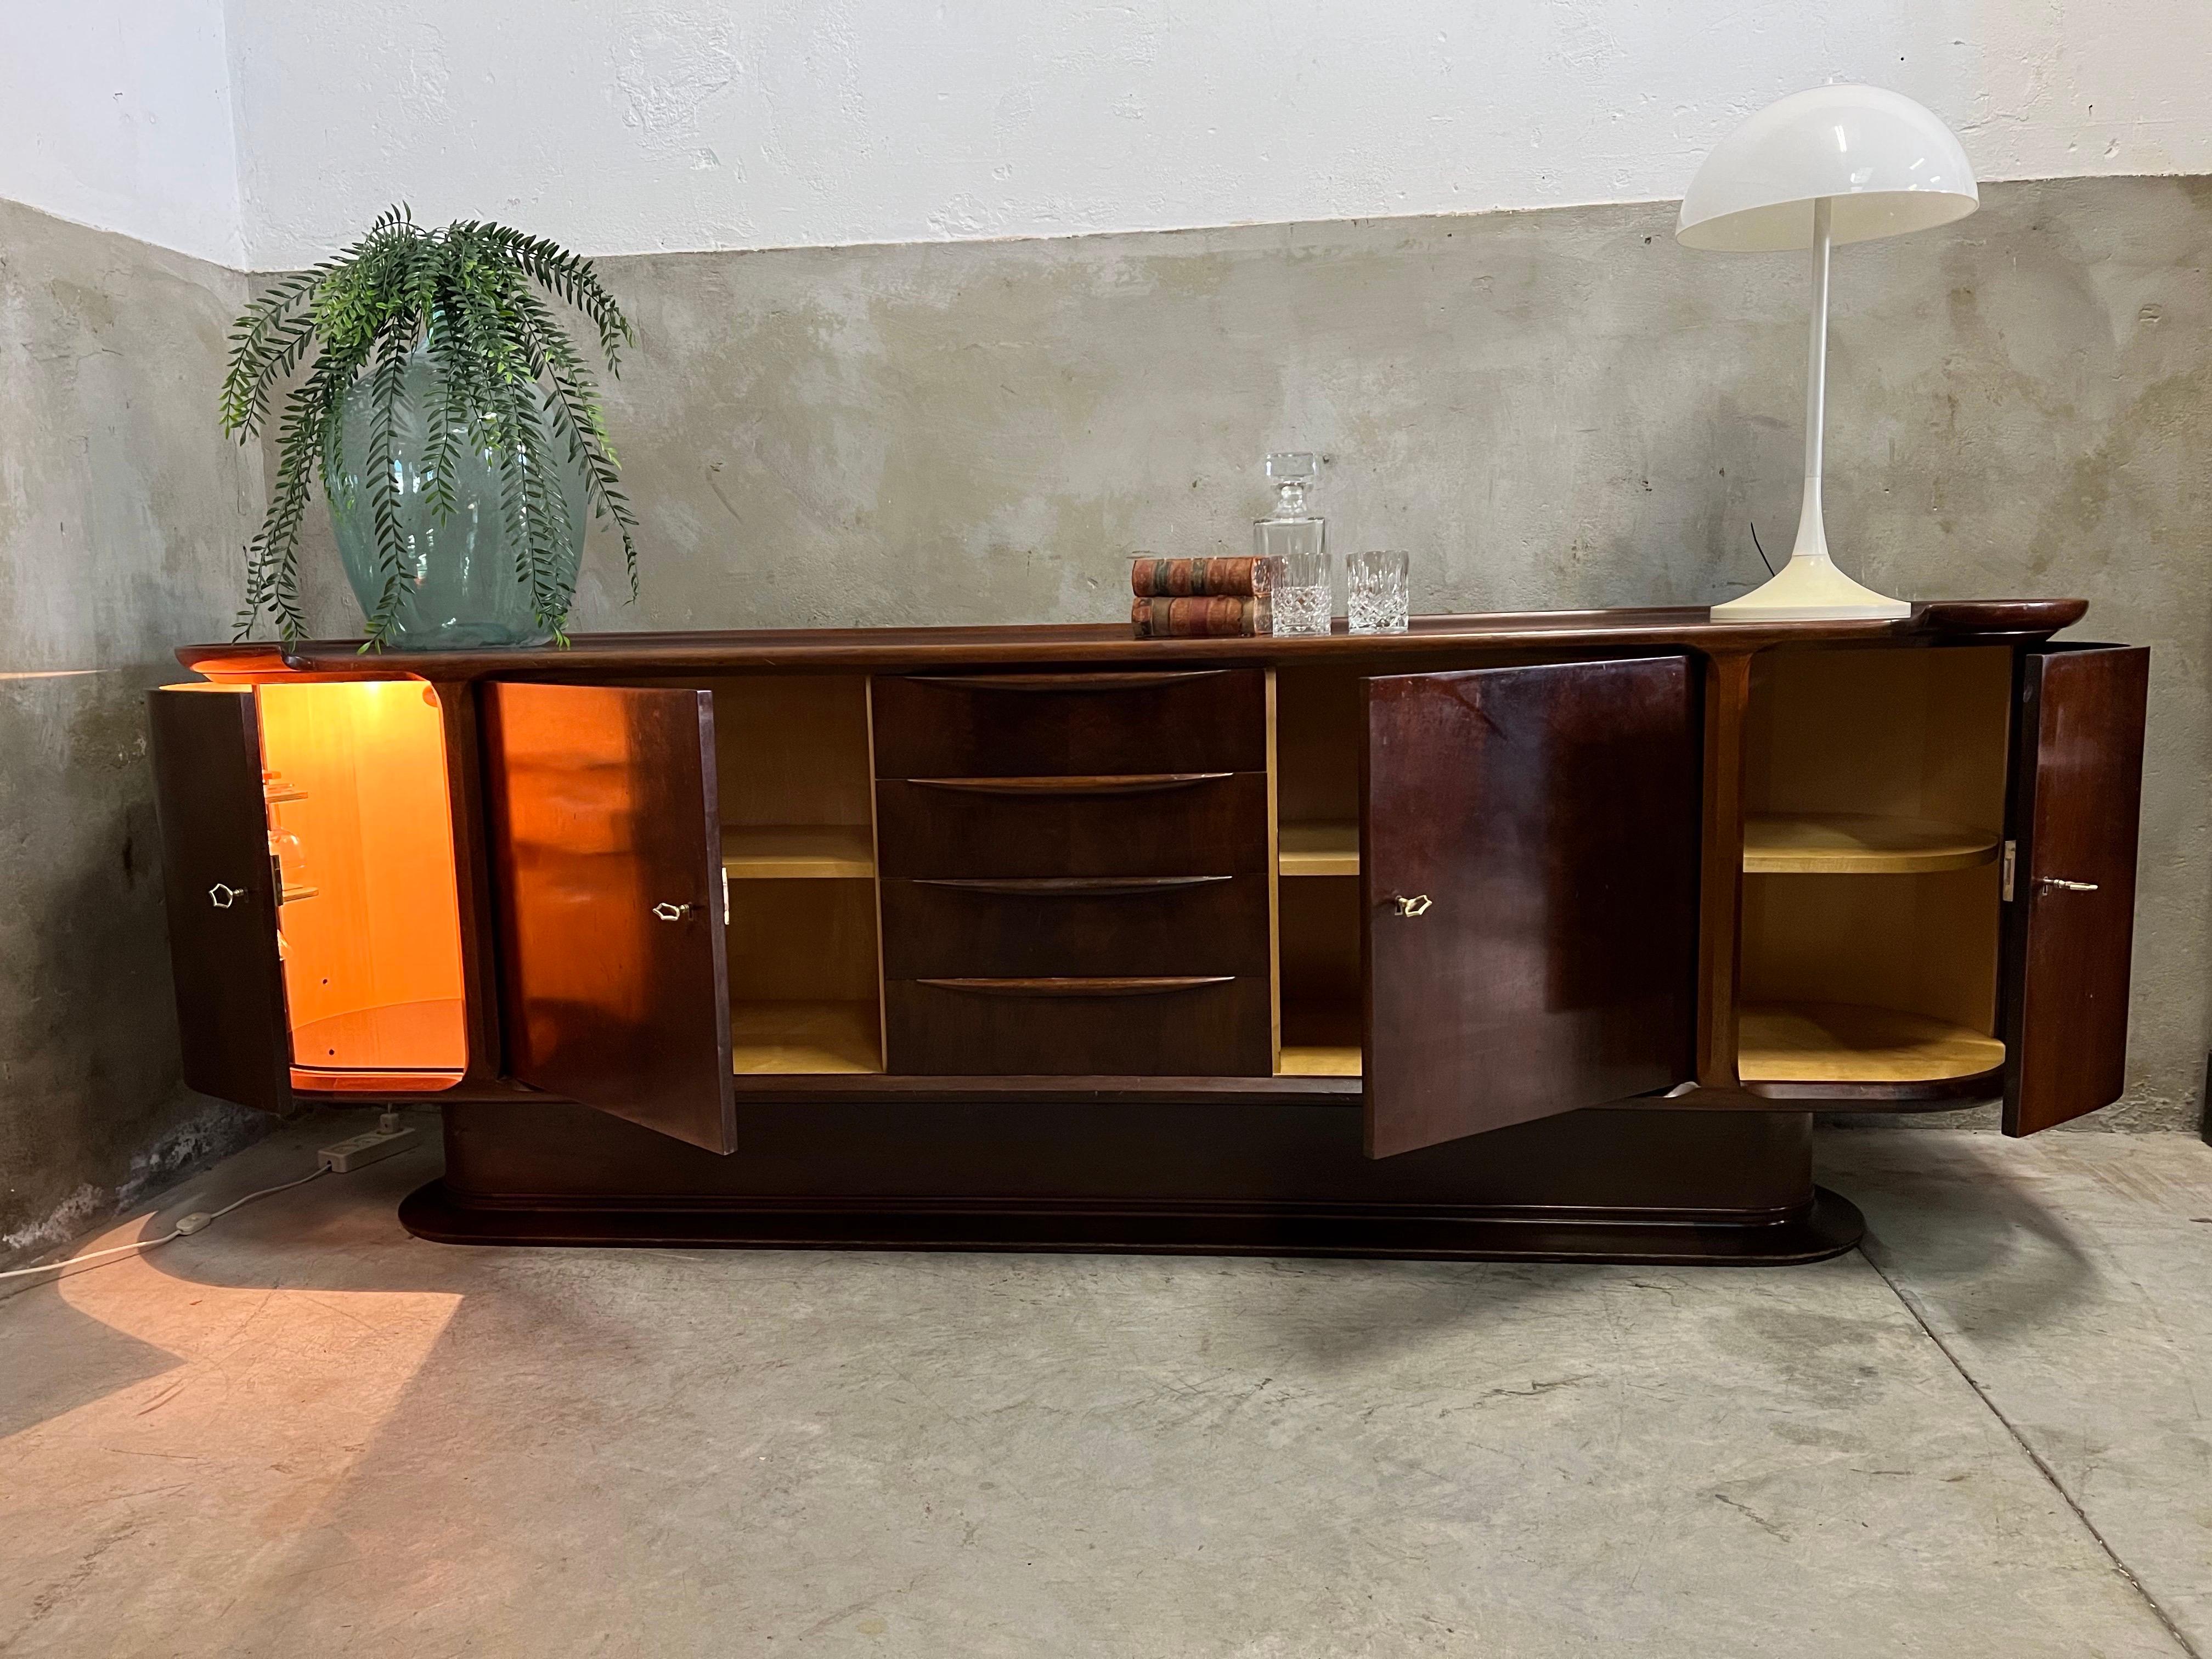 Art Deco Mid-20th Century, Top Quality A.A. Patijn Sideboard from the 1950s for Zijlstra